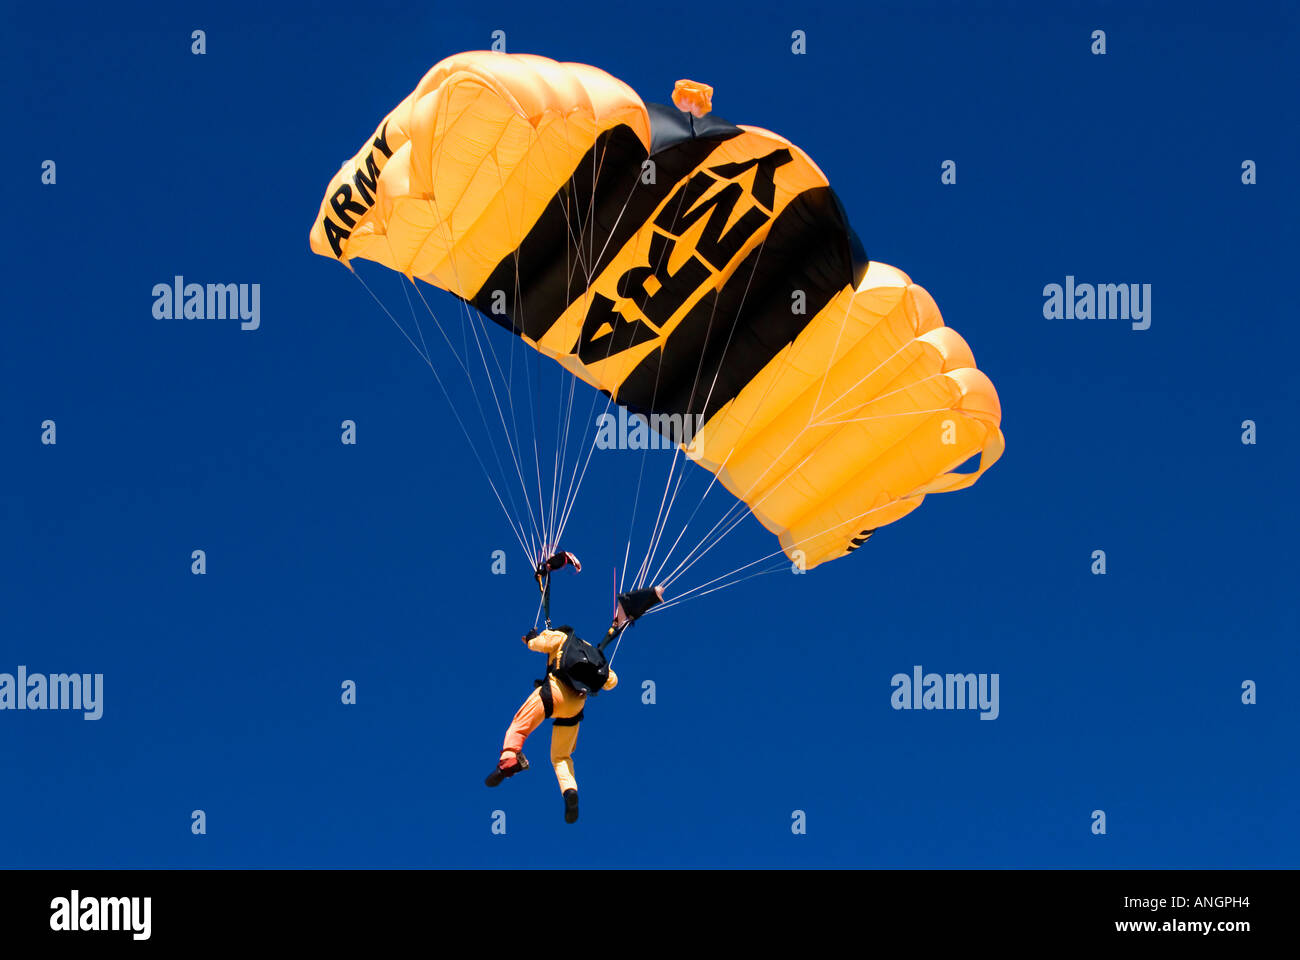 DVIDS - Images - U.S. Army Parachute Team jumps in to football